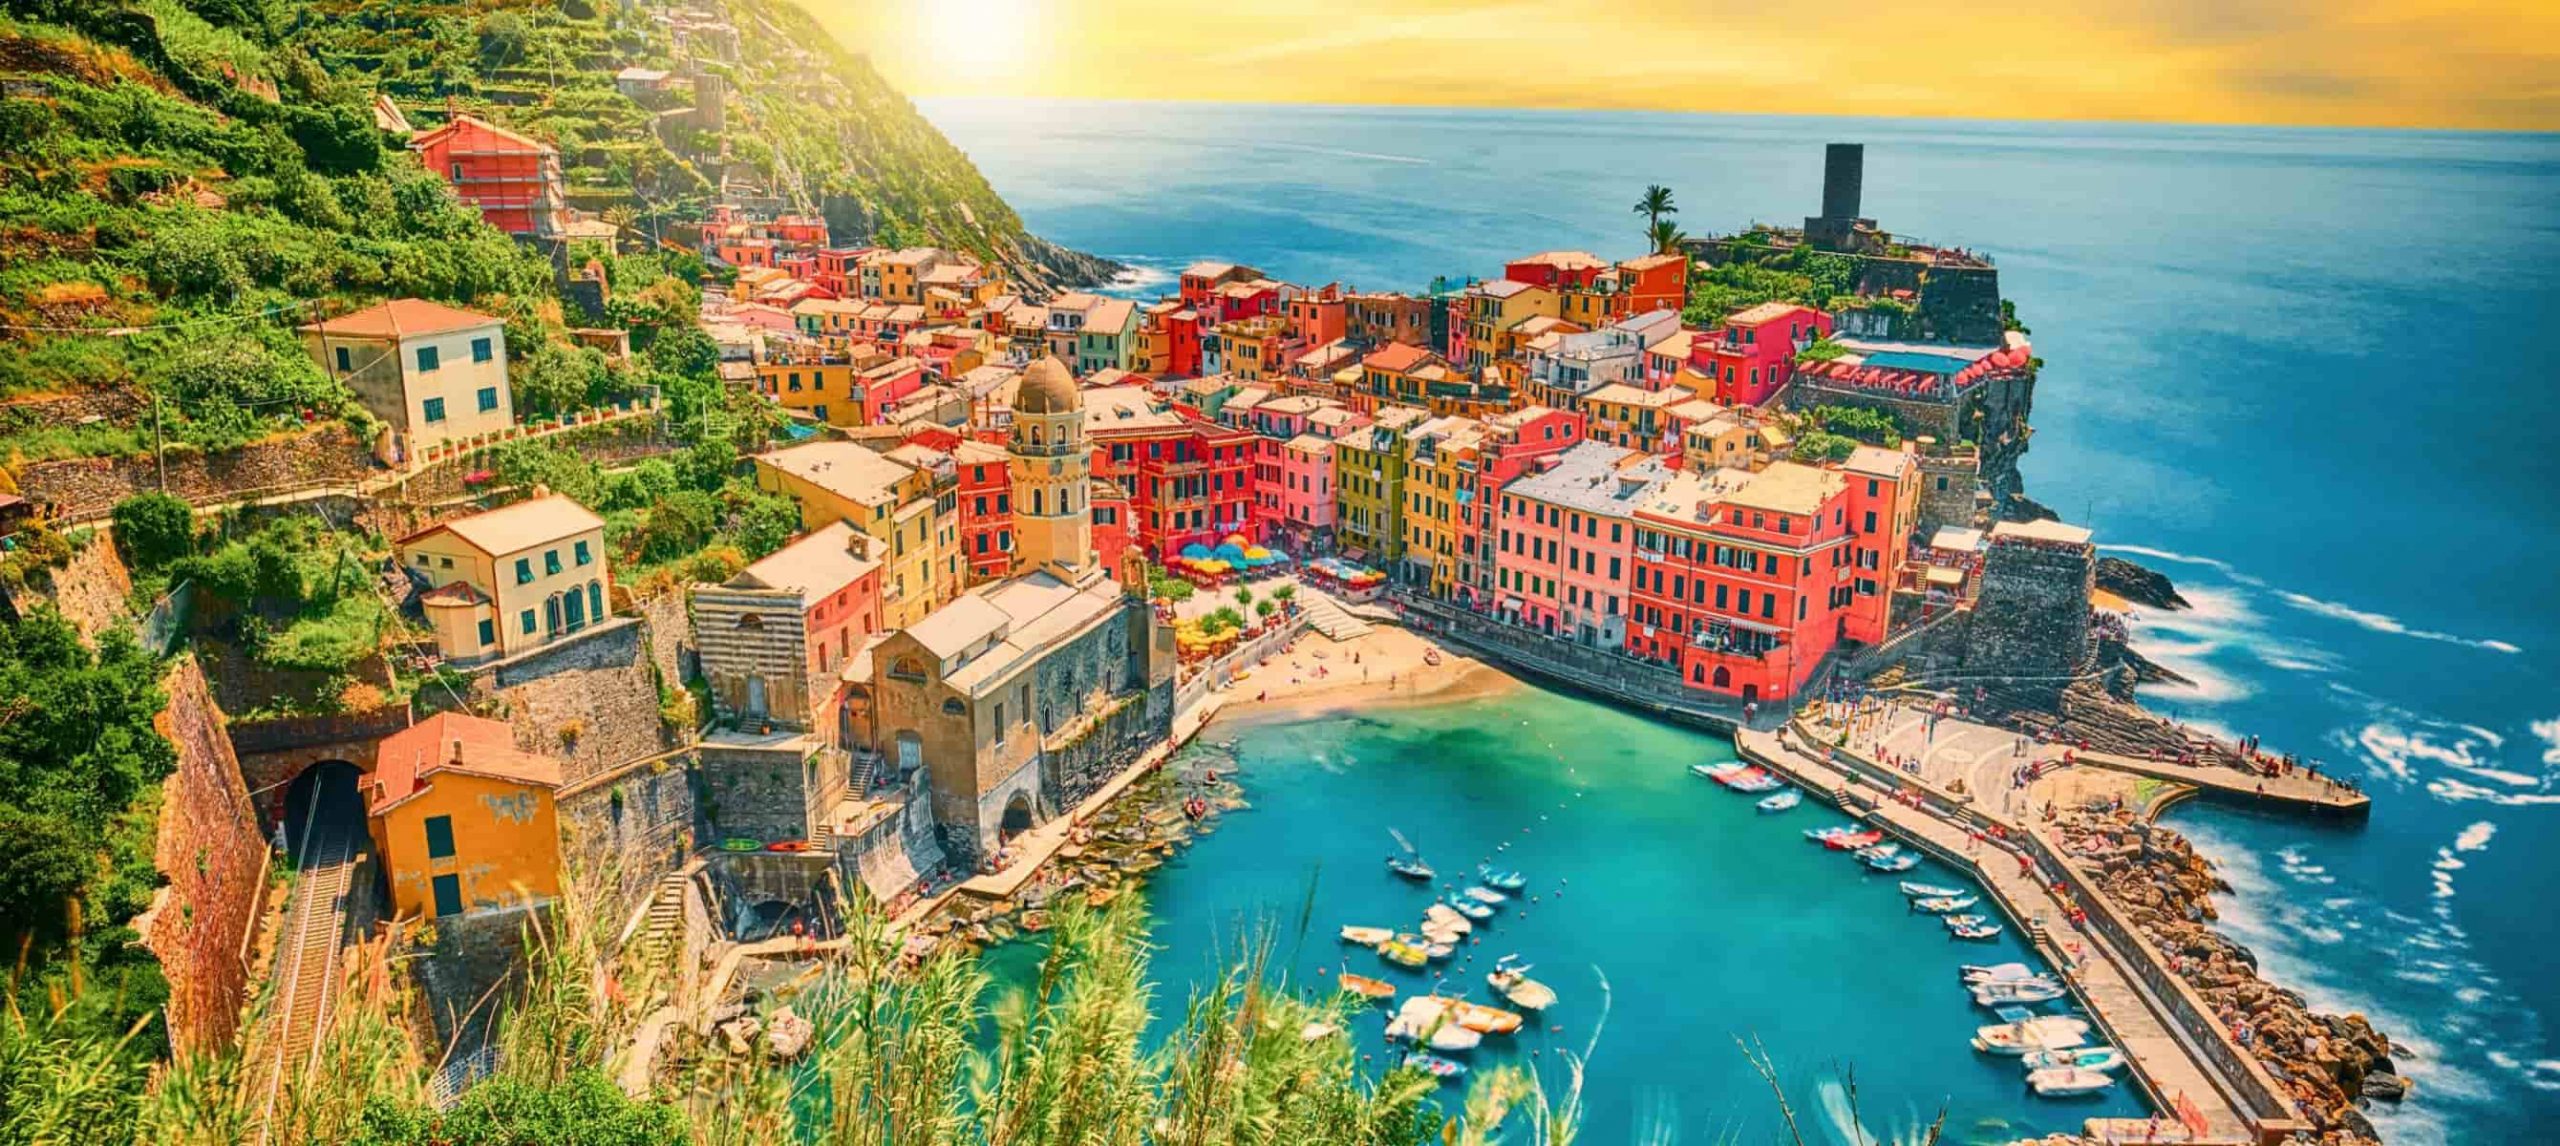 How To Get From Milan To Cinque Terre: 4 Ways